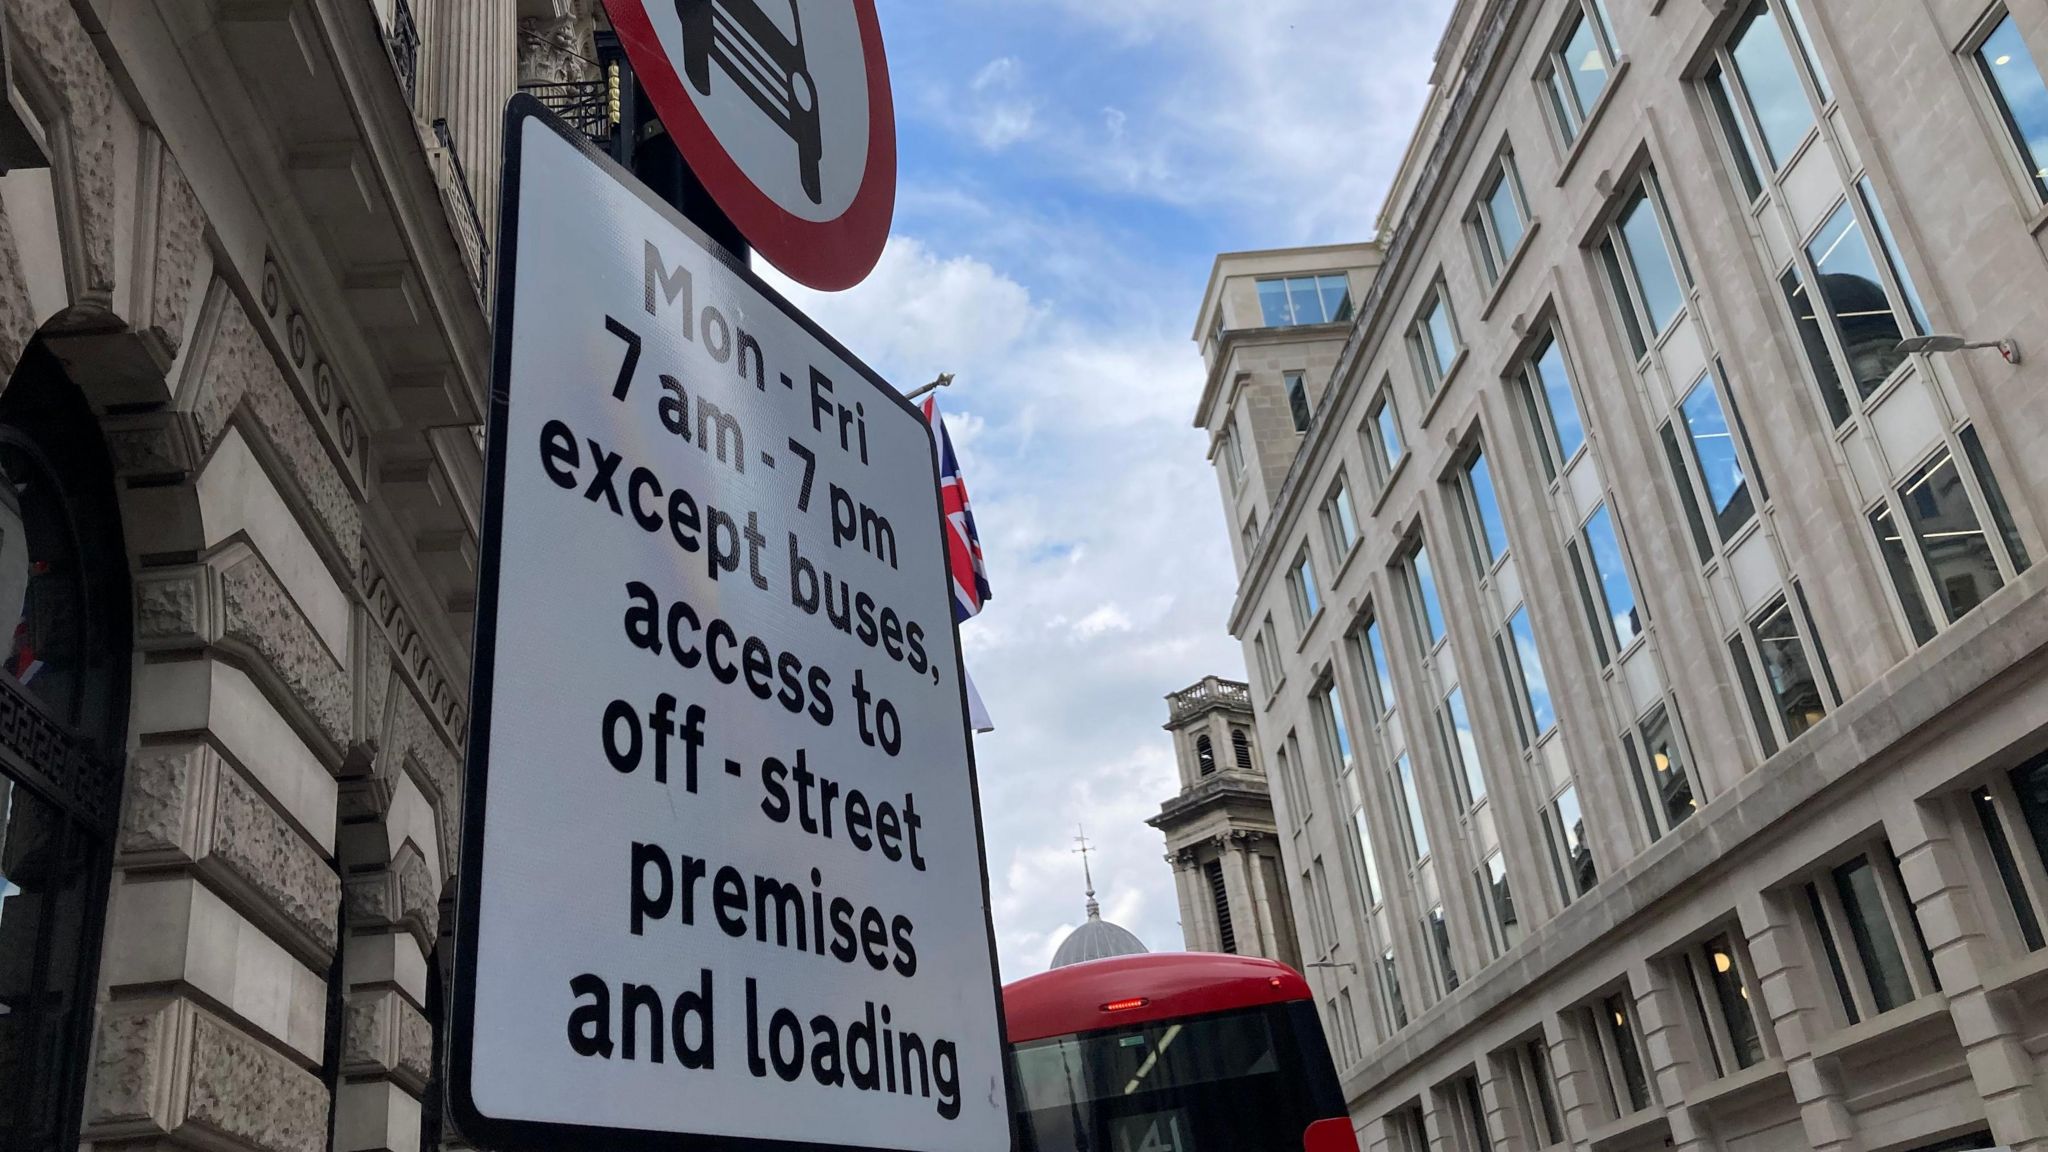 Bank junction: Will taxis be allowed back? - BBC News